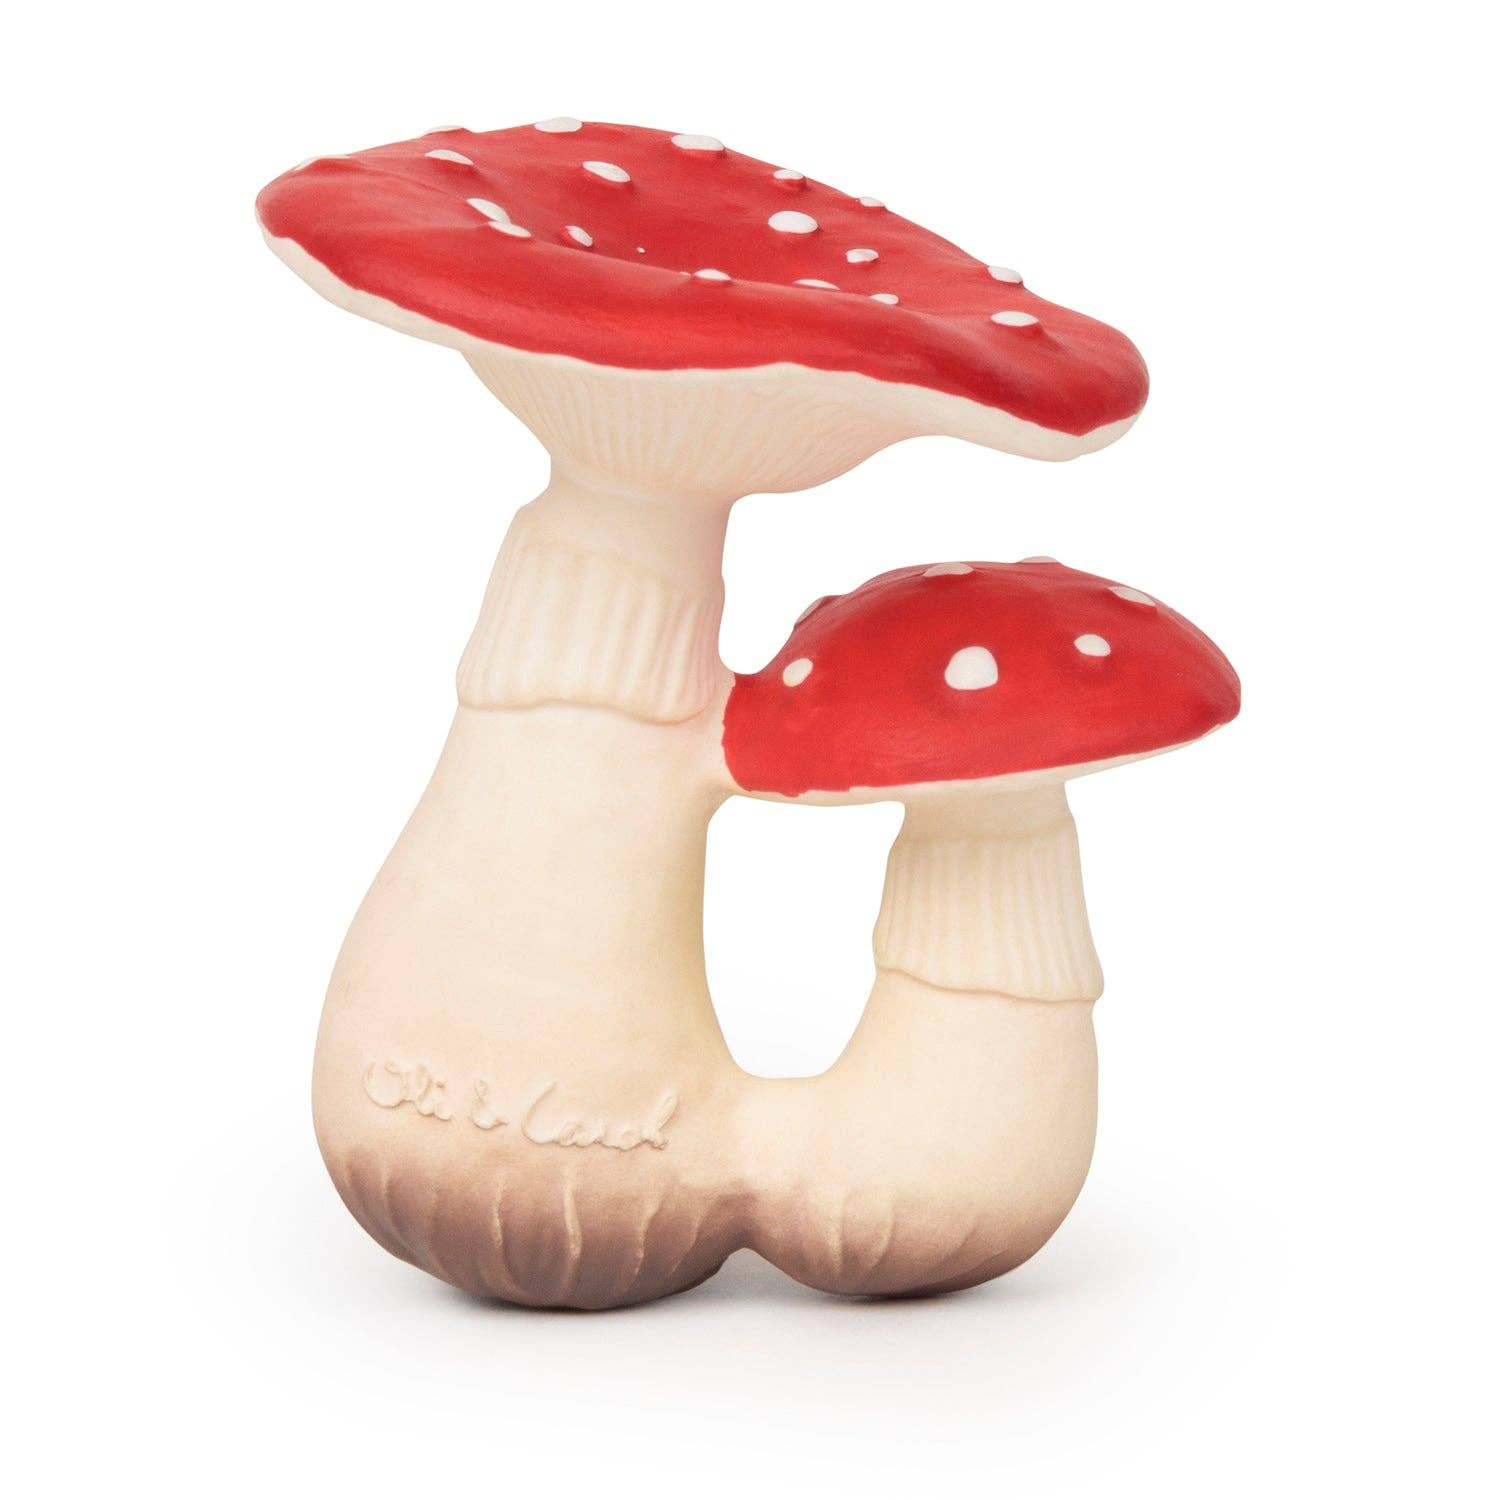 Photo of baby toy shaped like two woodland mushrooms with white stems and red tops that have small white spots.